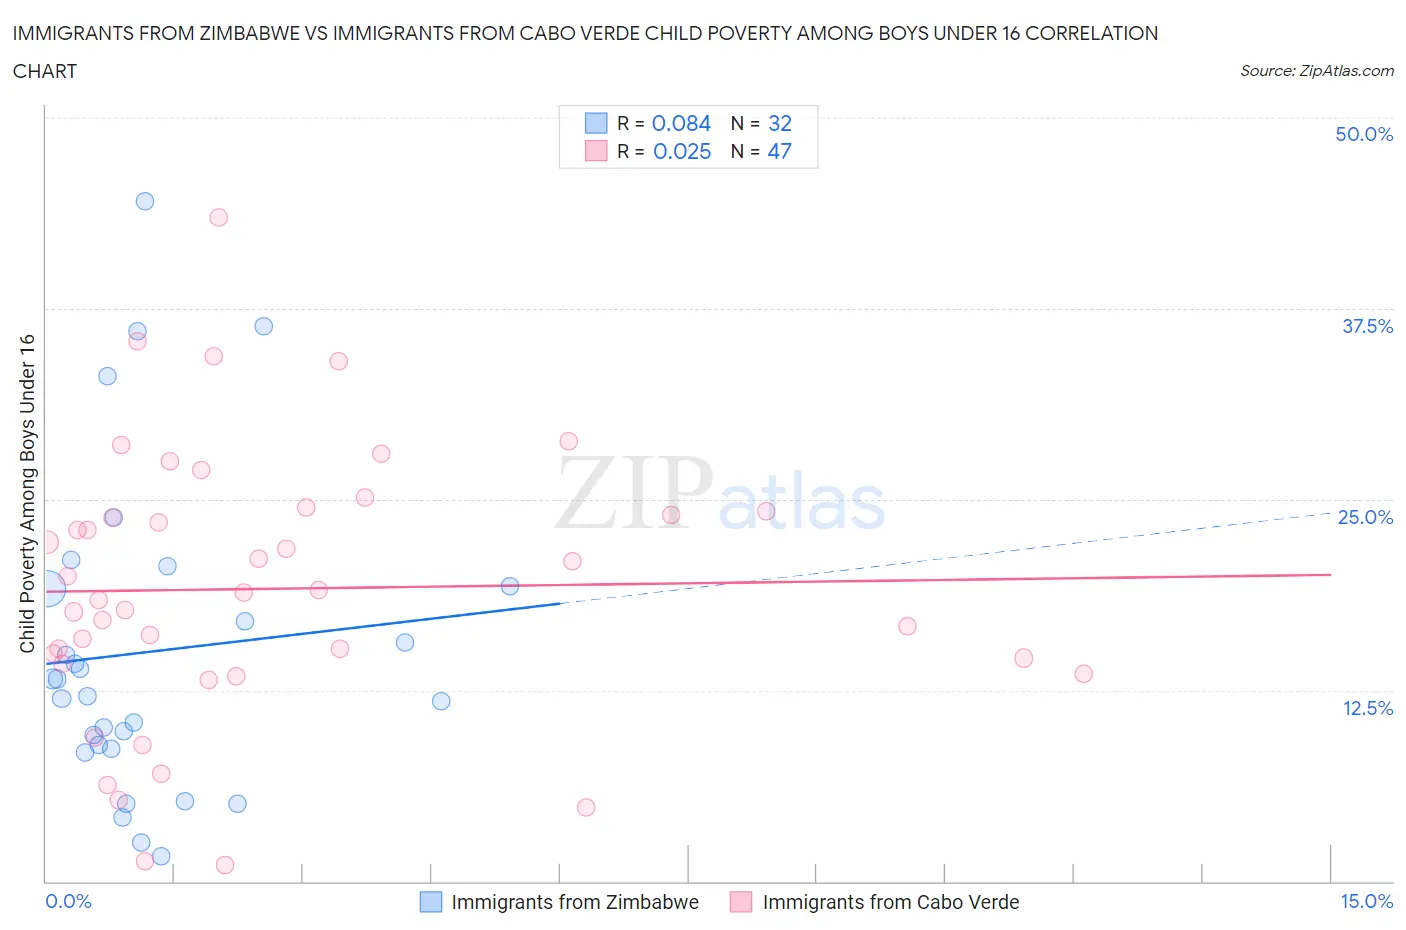 Immigrants from Zimbabwe vs Immigrants from Cabo Verde Child Poverty Among Boys Under 16